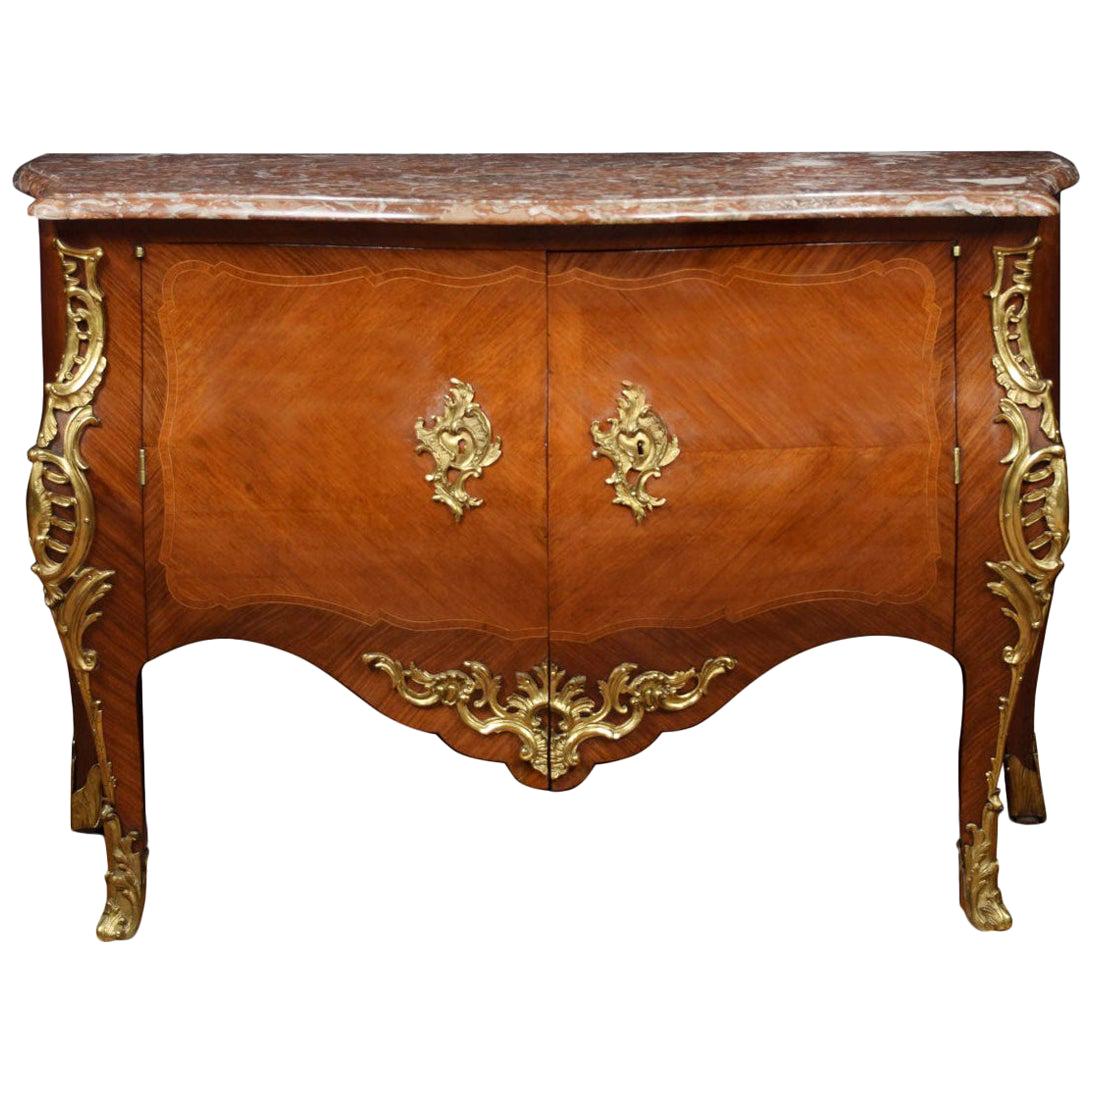 Late 18th Century French Gilt Bronze-Mounted Kingwood Commode